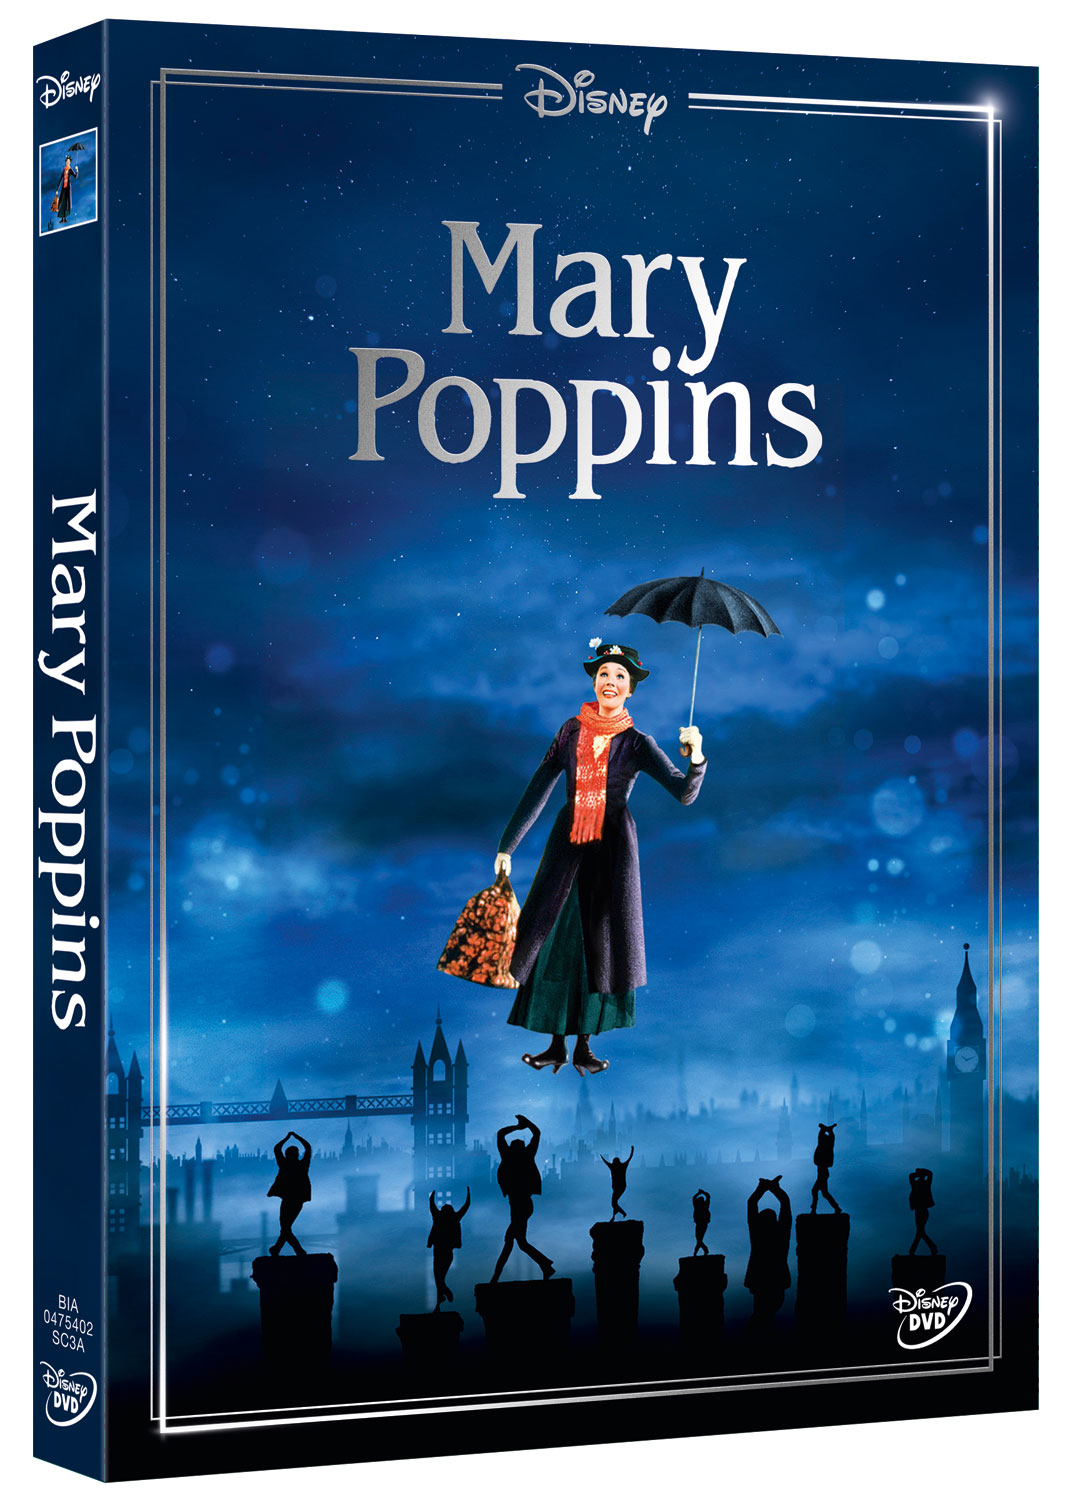 MARY POPPINS (NEW EDITION)